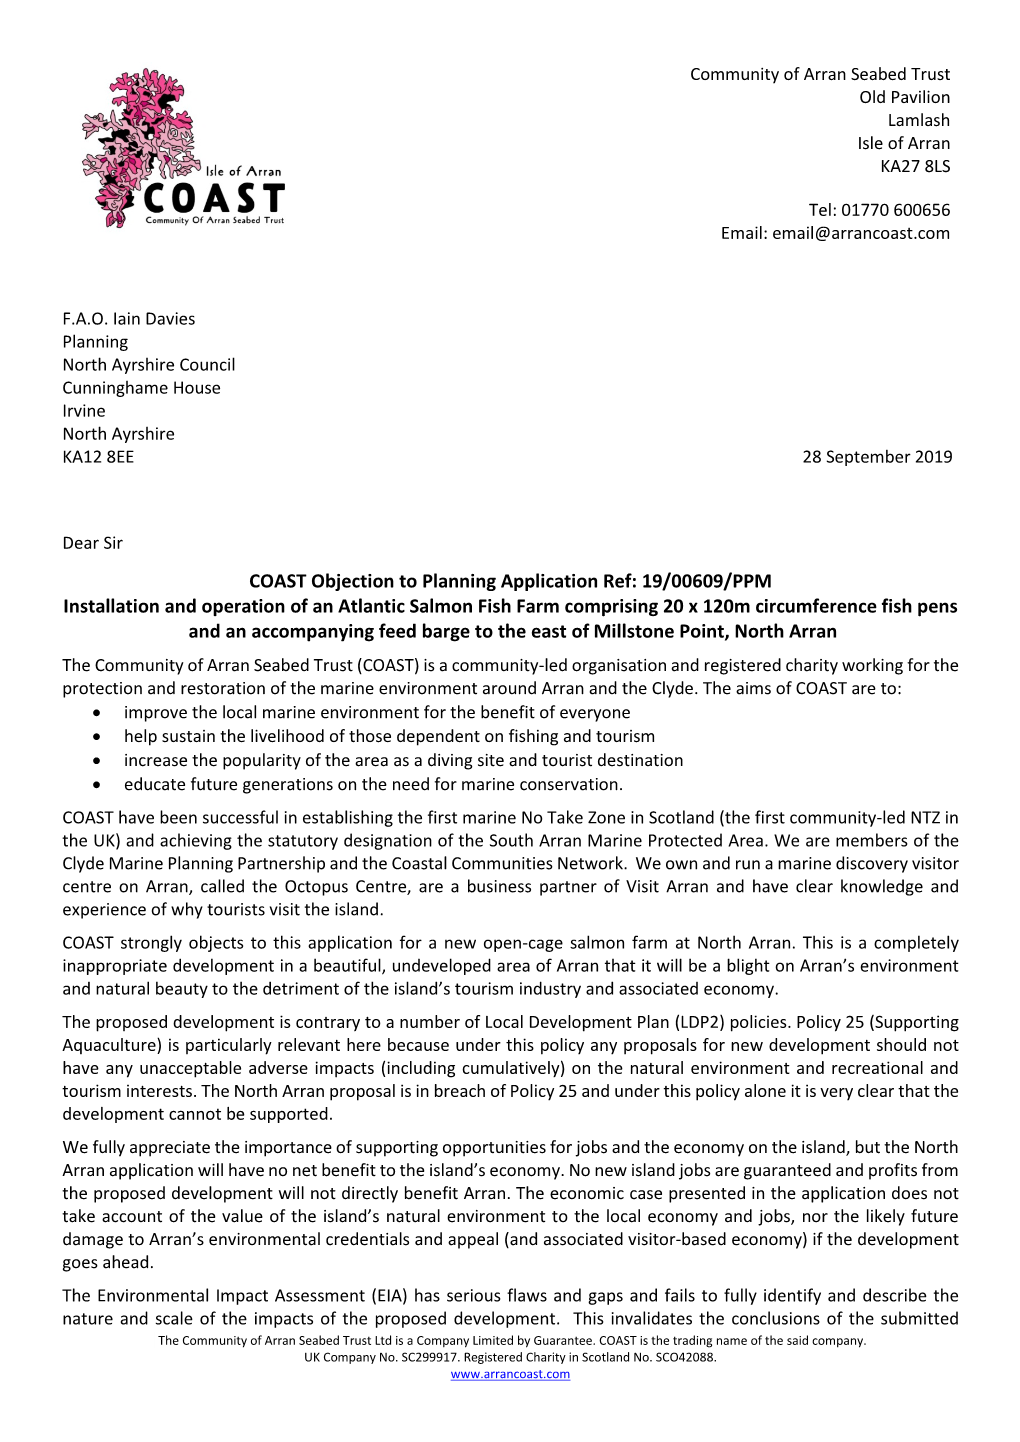 COAST Objection to Planning Application Ref: 19/00609/PPM